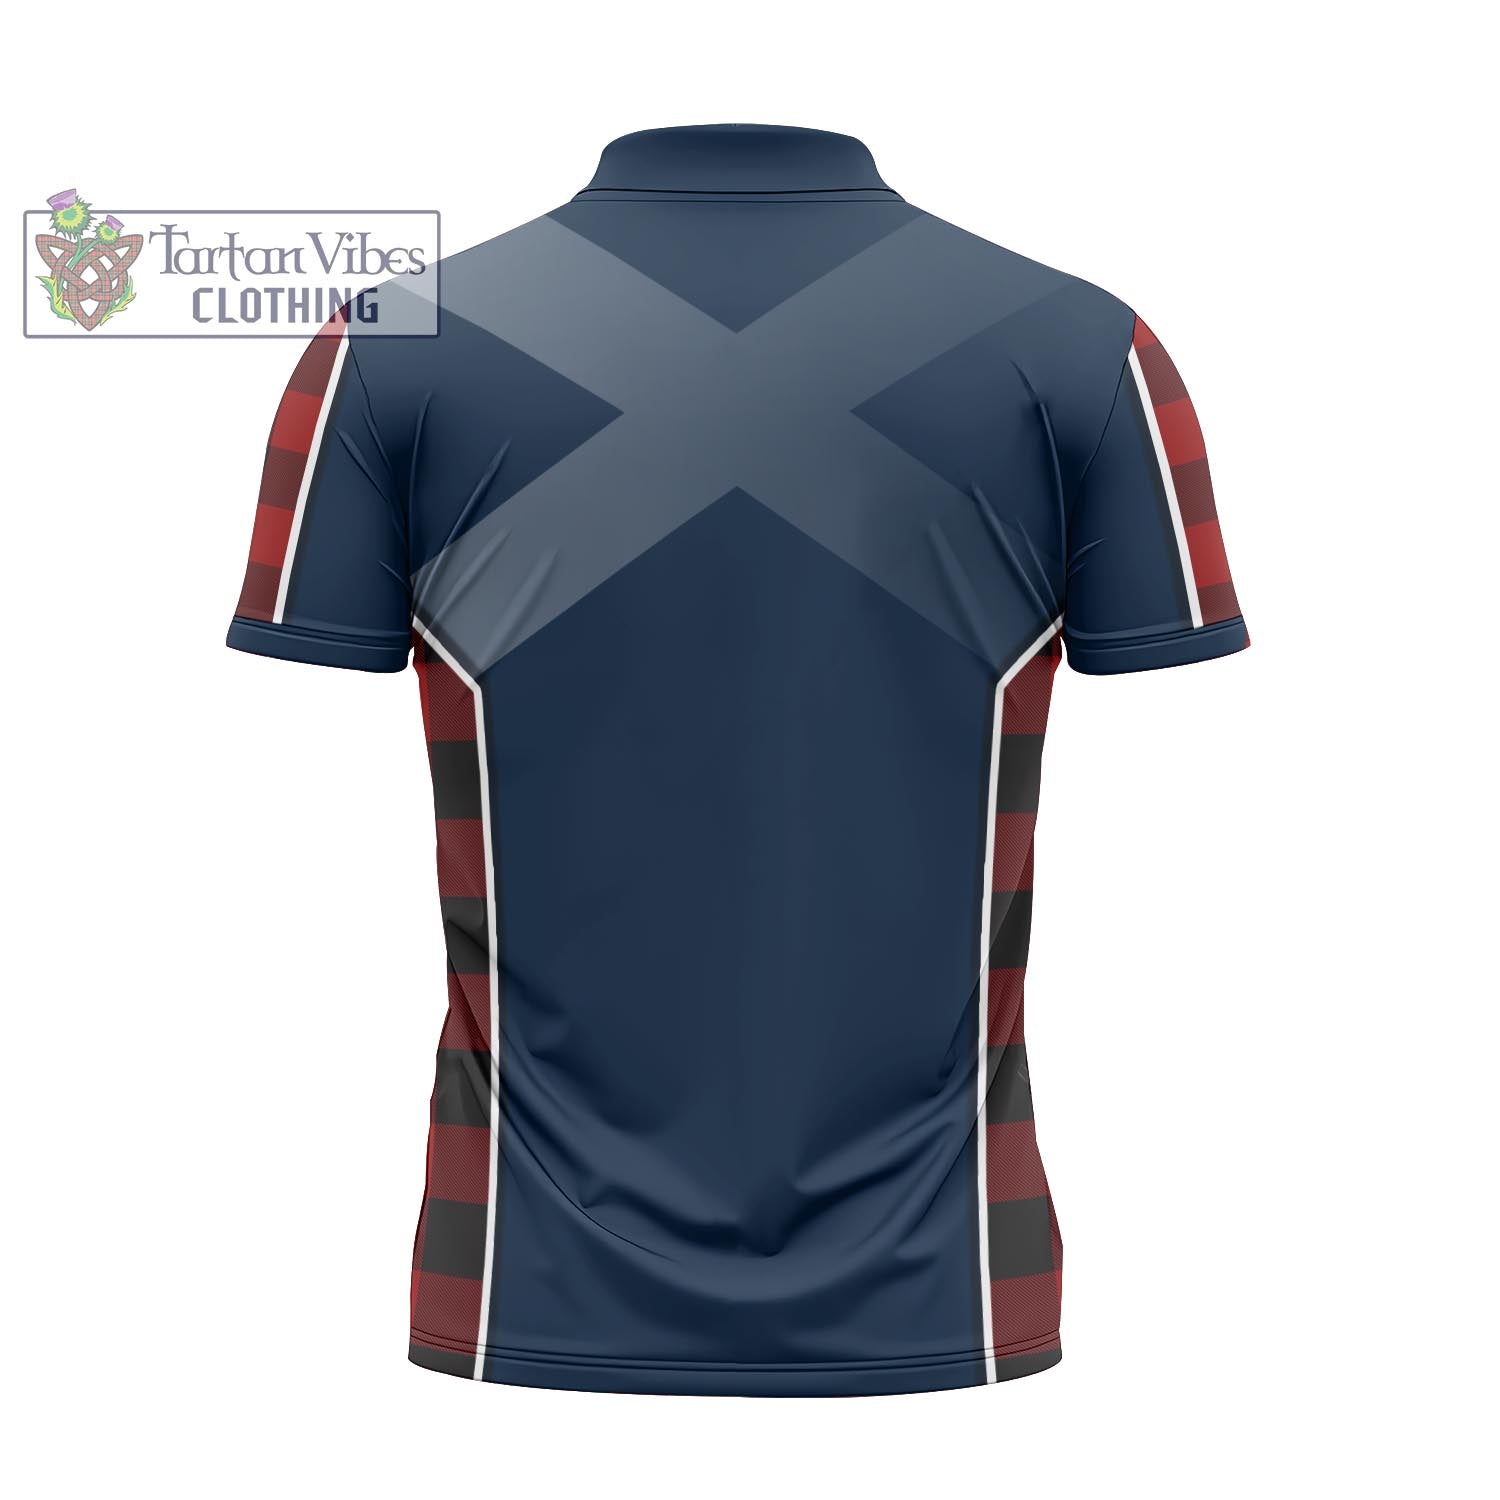 Tartan Vibes Clothing Rob Roy Macgregor Tartan Zipper Polo Shirt with Family Crest and Scottish Thistle Vibes Sport Style